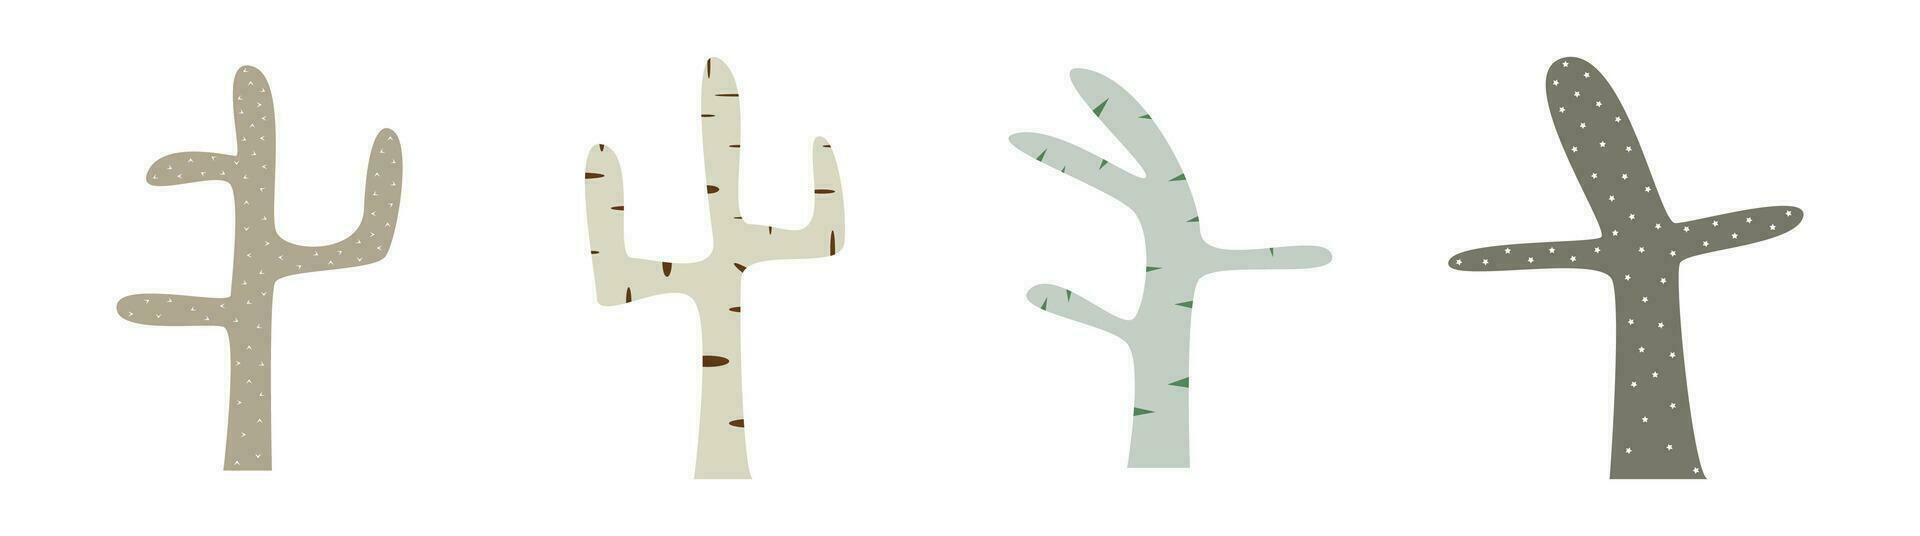 set of cute cactus plant on white background. cactus vector illustration in flat style. vector illustration